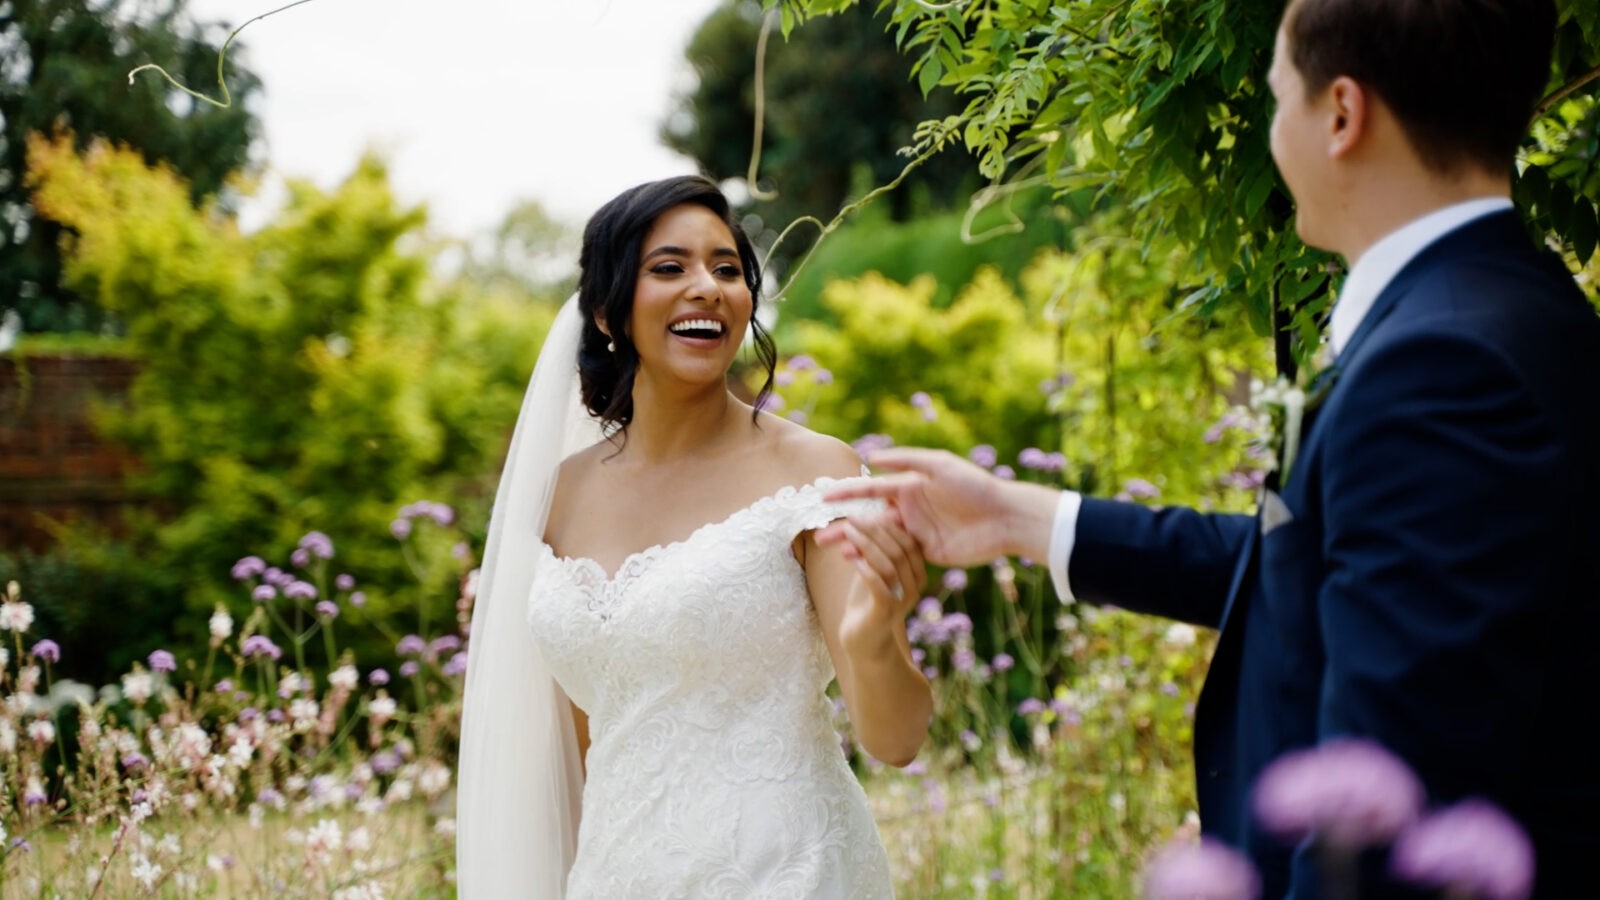 A South African bride stands holding her husbands hand laughing in a flower garden while wearing her white wedding dress and veil, she looks very happy